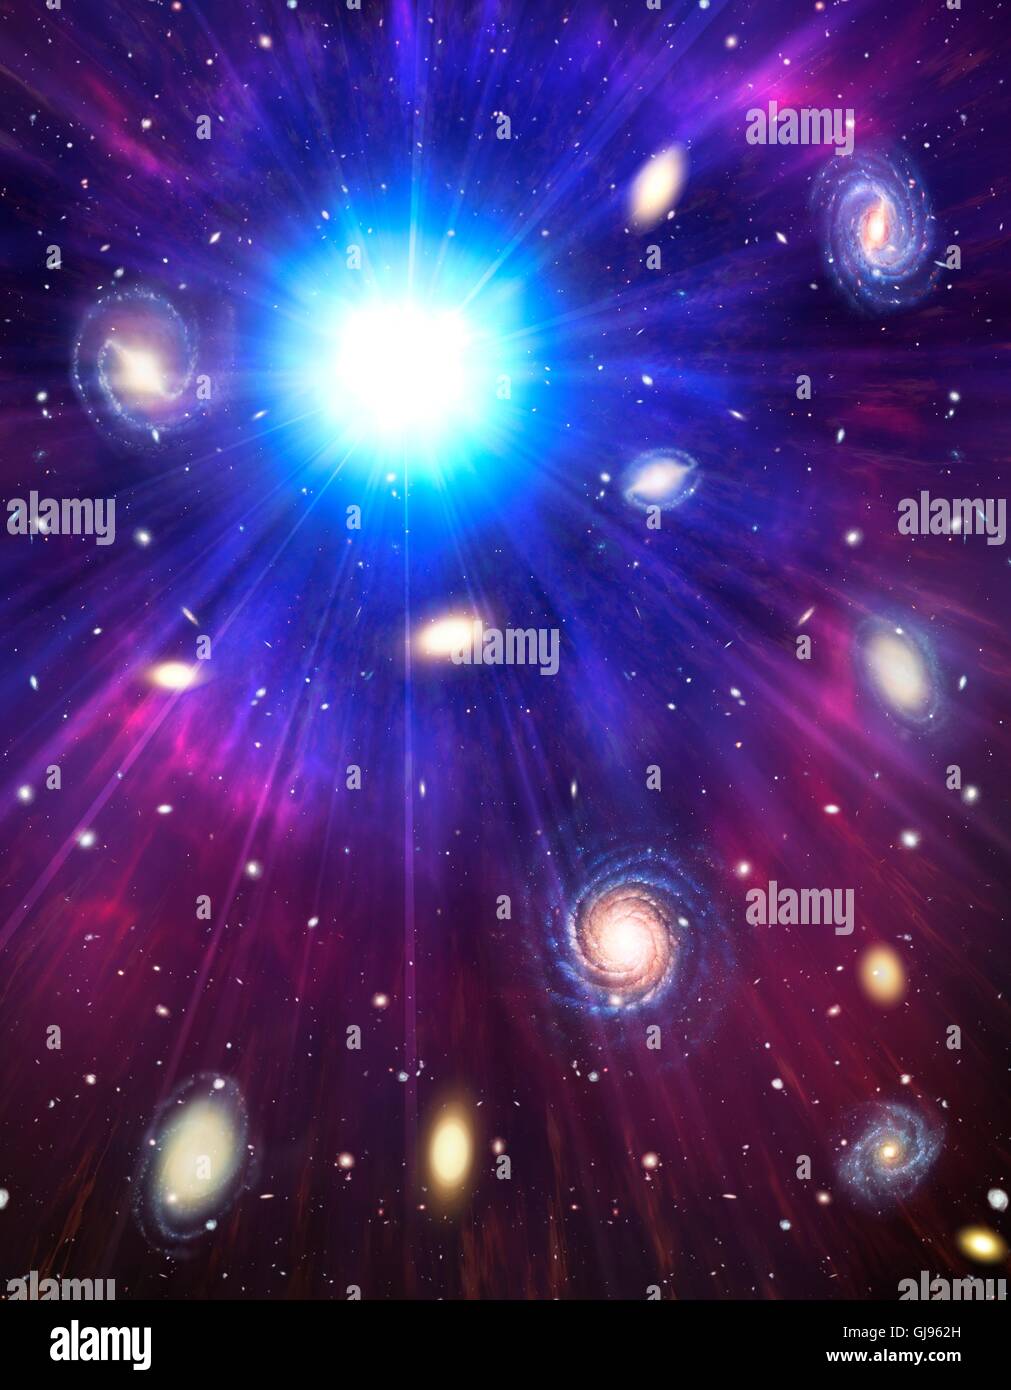 Big Bang, conceptual image. Computer illustration representing the origin of the universe. The term Big Bang describes the initial expansion of all the matter in the universe from an infinitely compact state 13.7 billion years ago. The initial conditions are not known, but less than a second after the beginning, temperatures were trillions of degrees Celsius and the primordial universe was much smaller than an atom. It has been expanding and cooling ever since. Matter formed and coalesced into the galaxies, which are observed to be moving away from each other. Background radiation in the Stock Photo